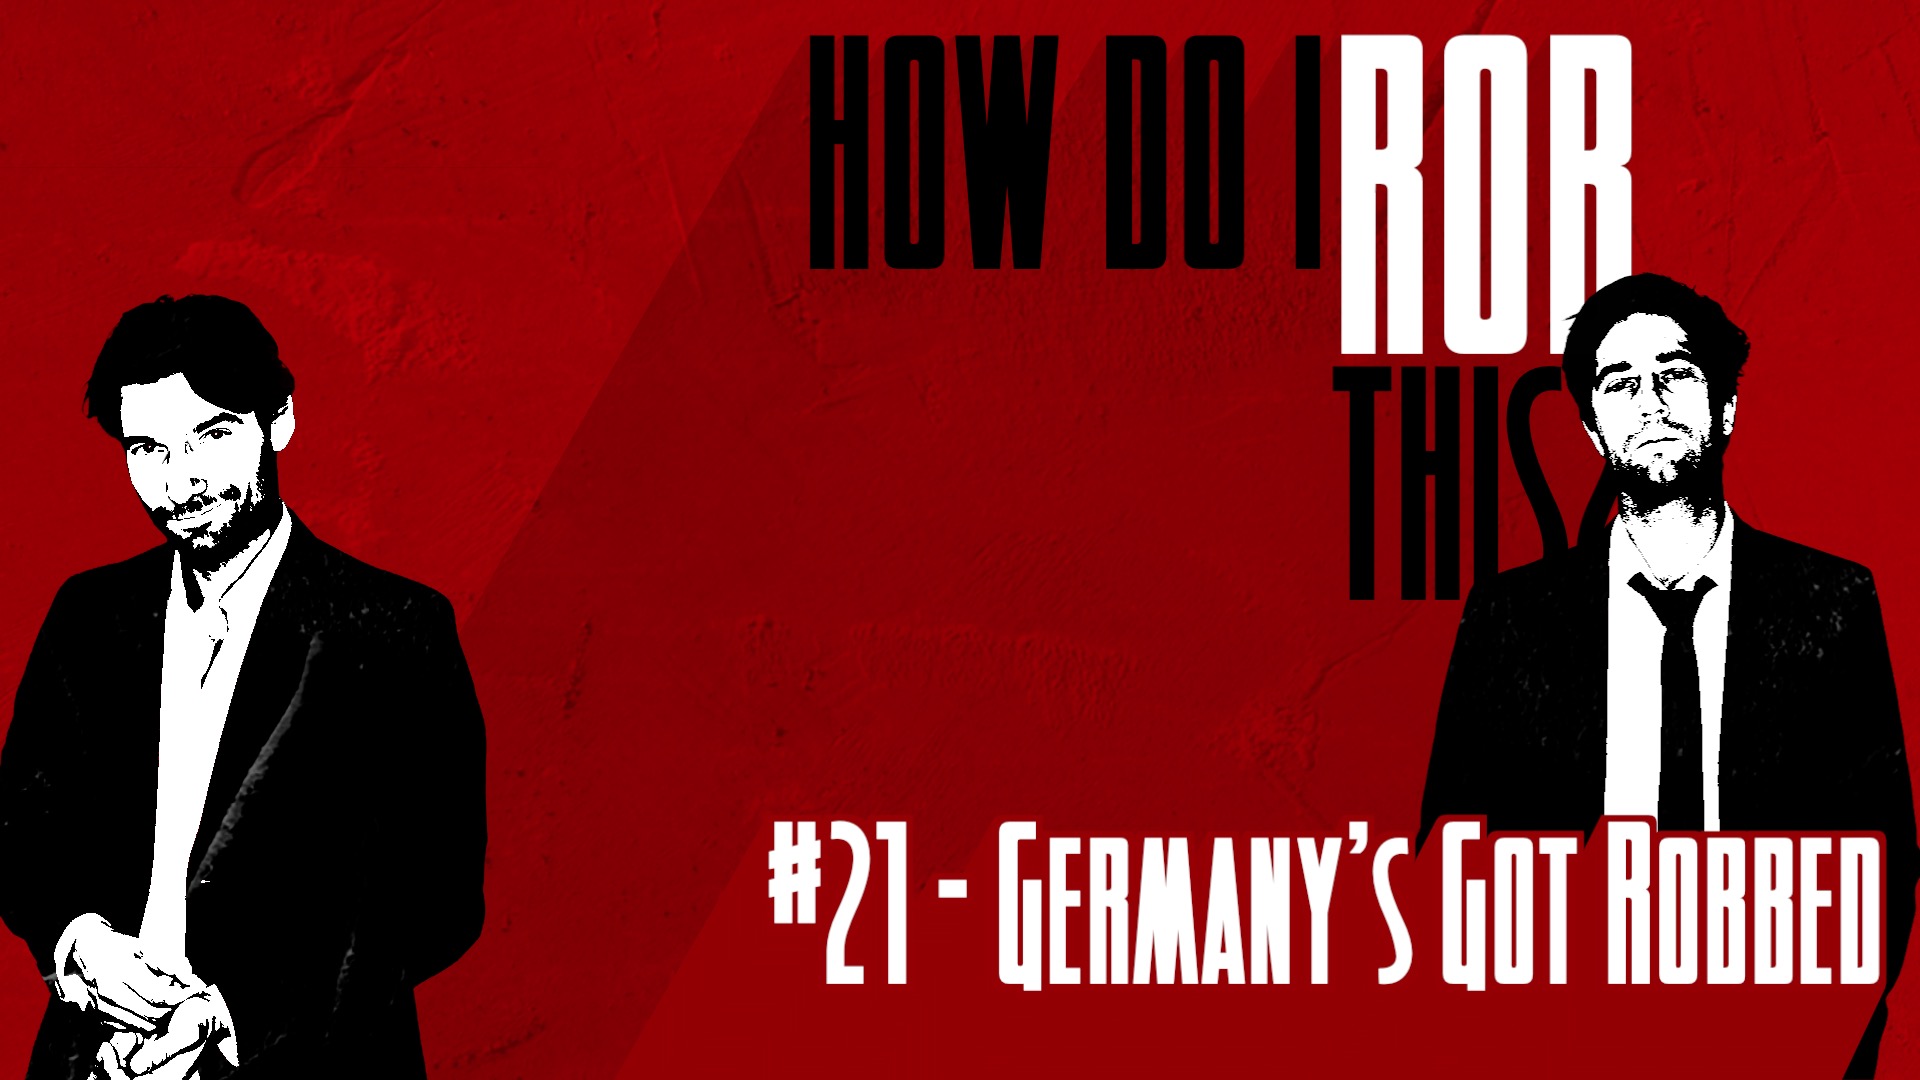 __How Do I Rob This_XX_BASIC RED_SOCIAL DISTANCING_21 Germany's Got Robbed